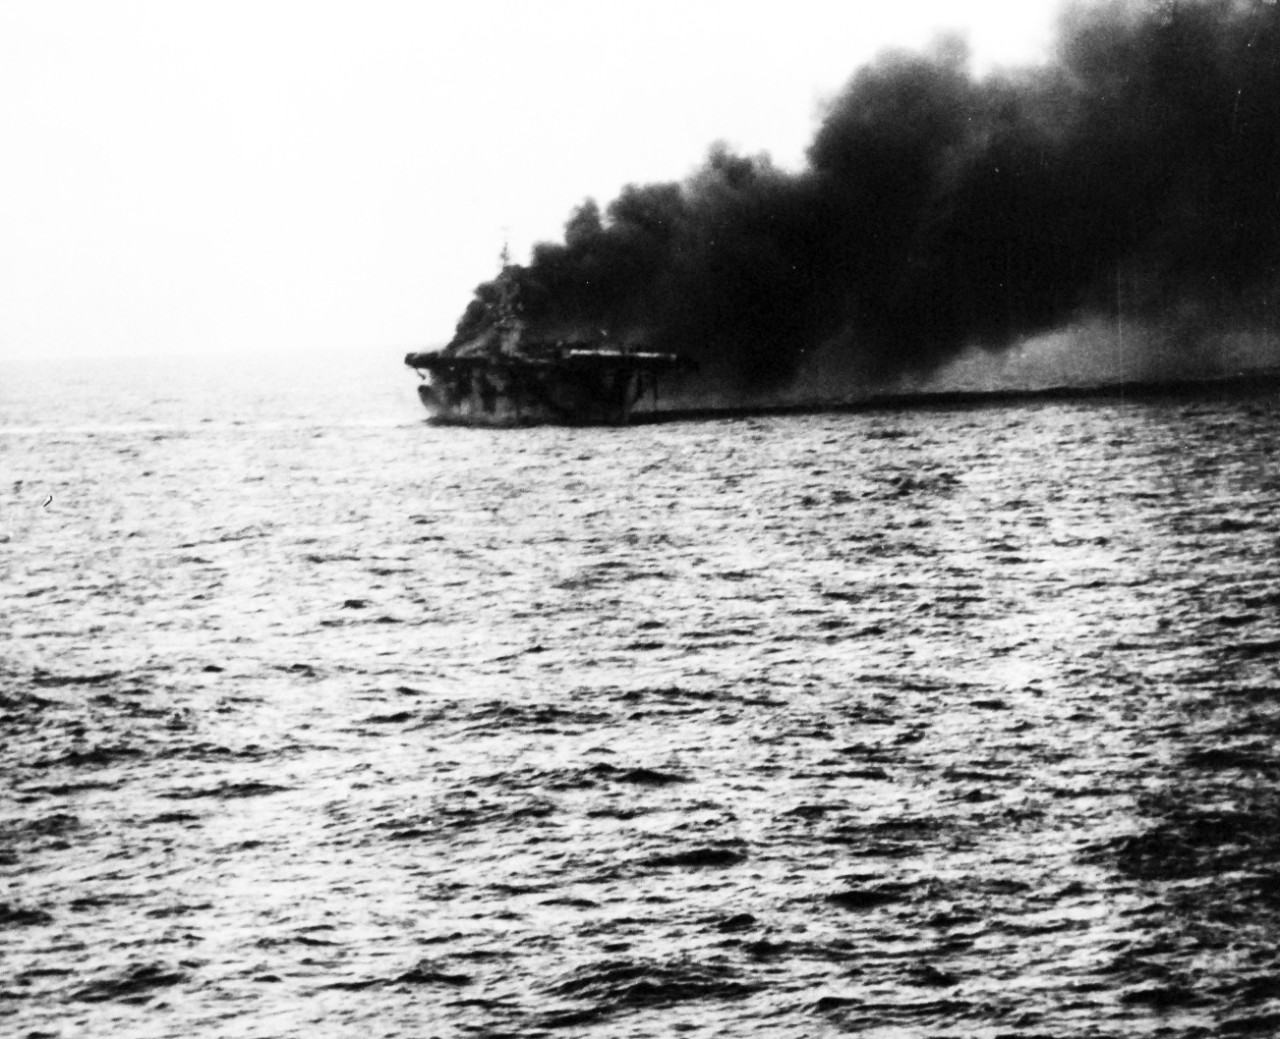 80-G-270512:  USS St. Lo (CVE-63), October 25, 1944.  St. Lo burning after being hit by a Japanese suicide plane off Leyte Gulf, Philippines.  Taken from USS Kalinin Bay (CVE-68).  Official U.S. Navy photograph, now in the collections of the National Archives.  